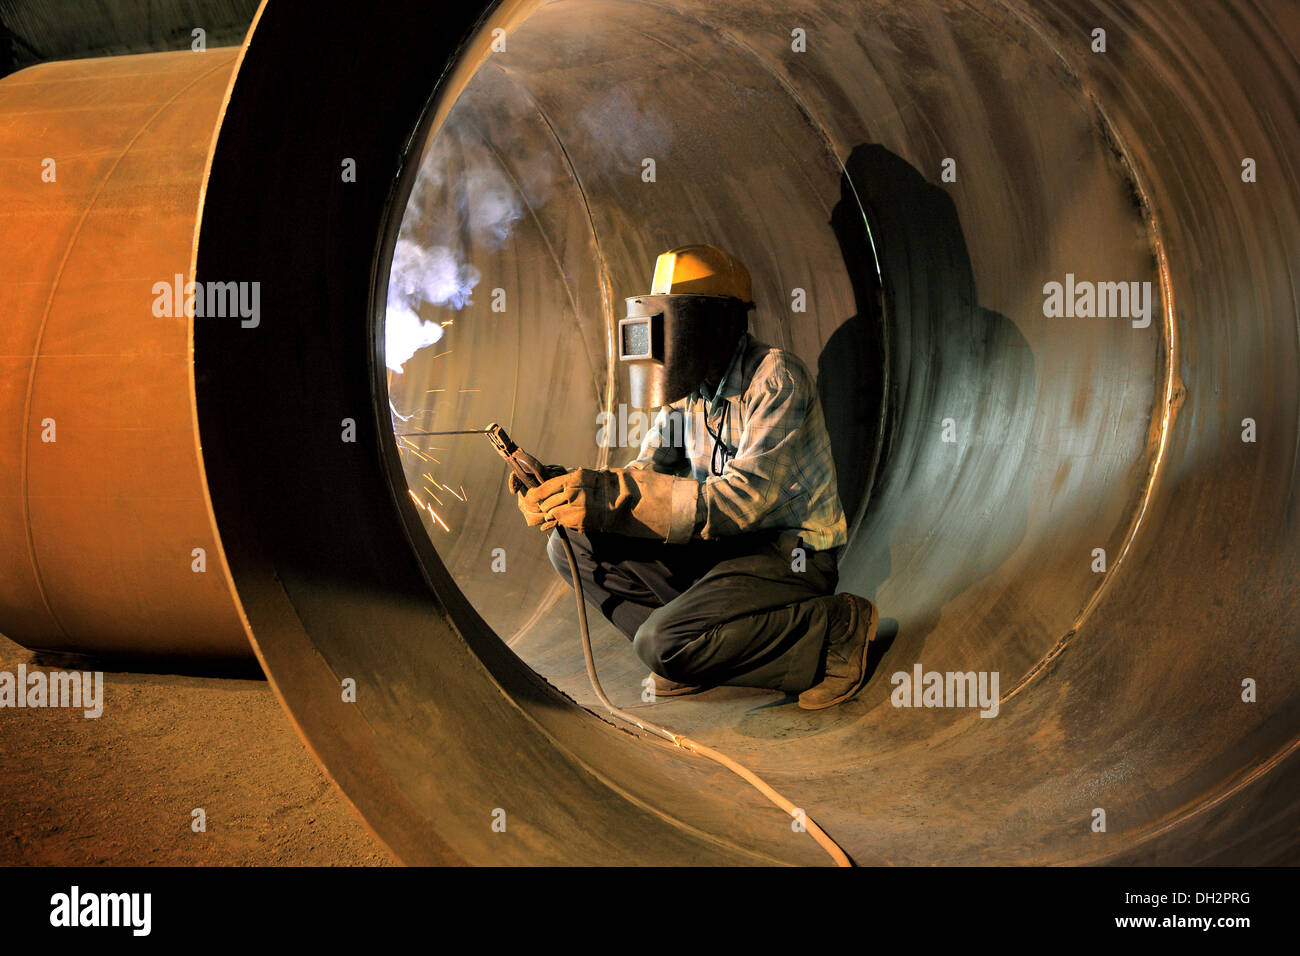 Industrial worker welding with safety gear in industrial pipe Stock Photo